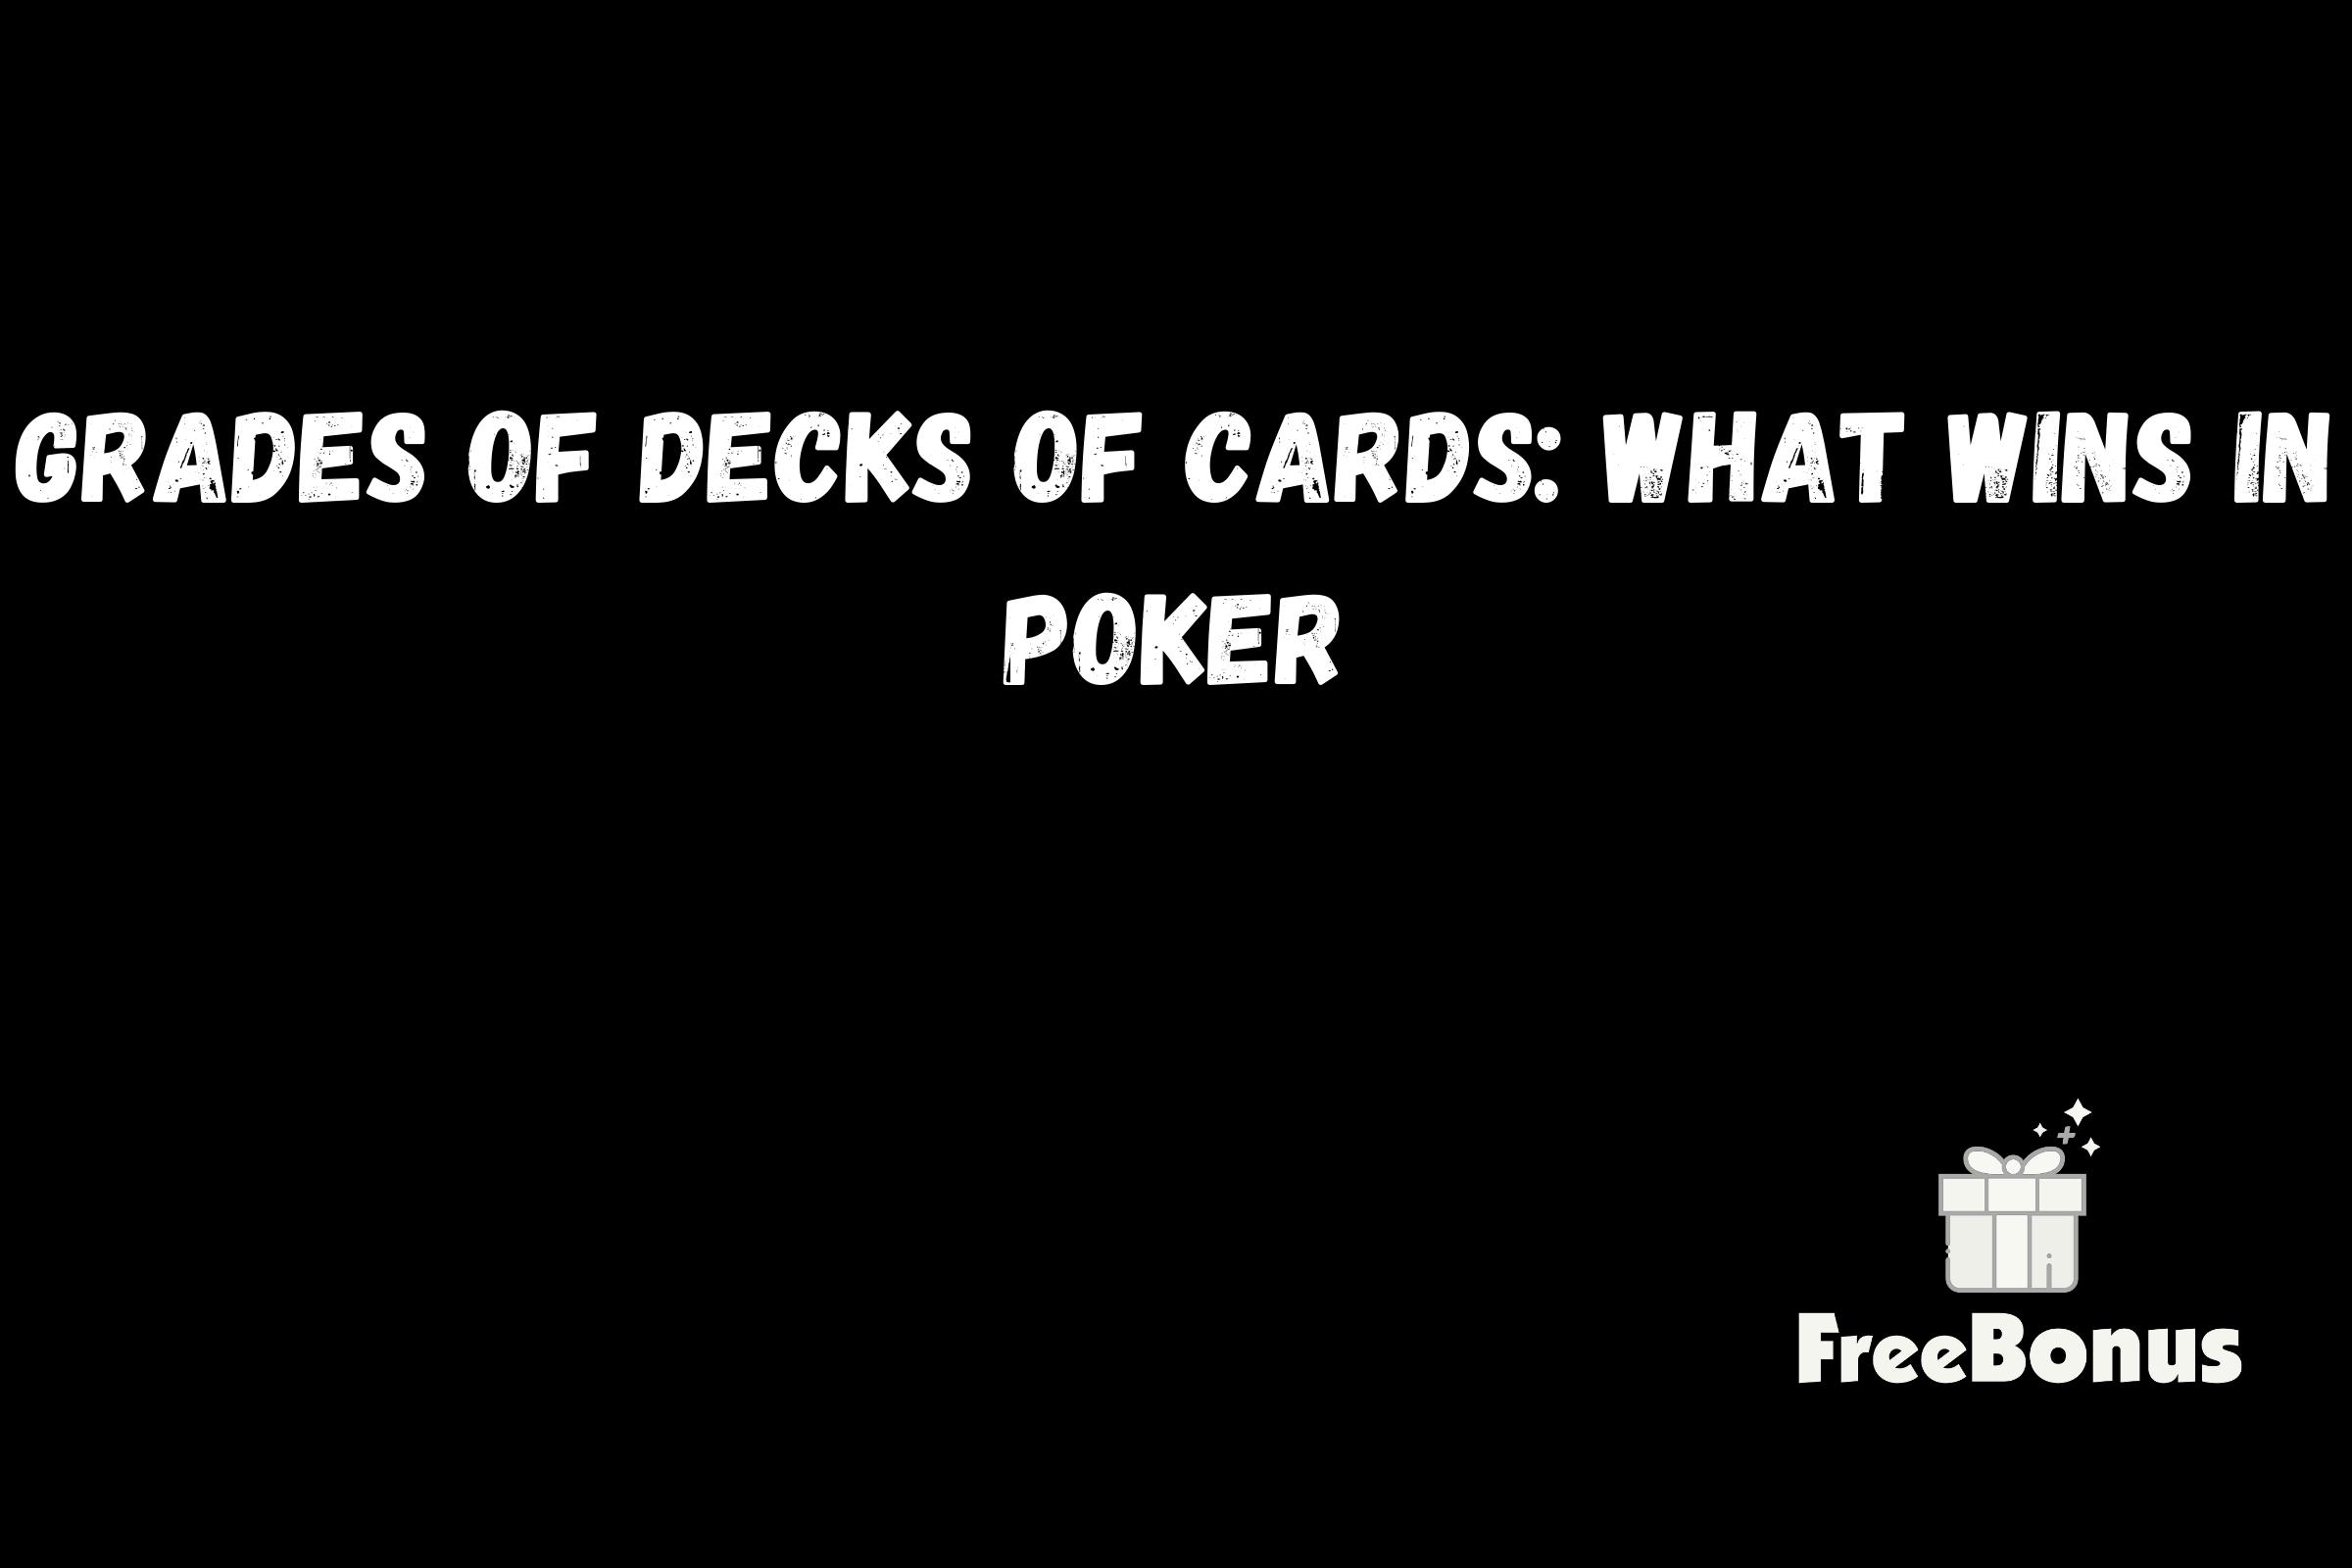 Grades Of Decks Of Cards: What Wins In Poker